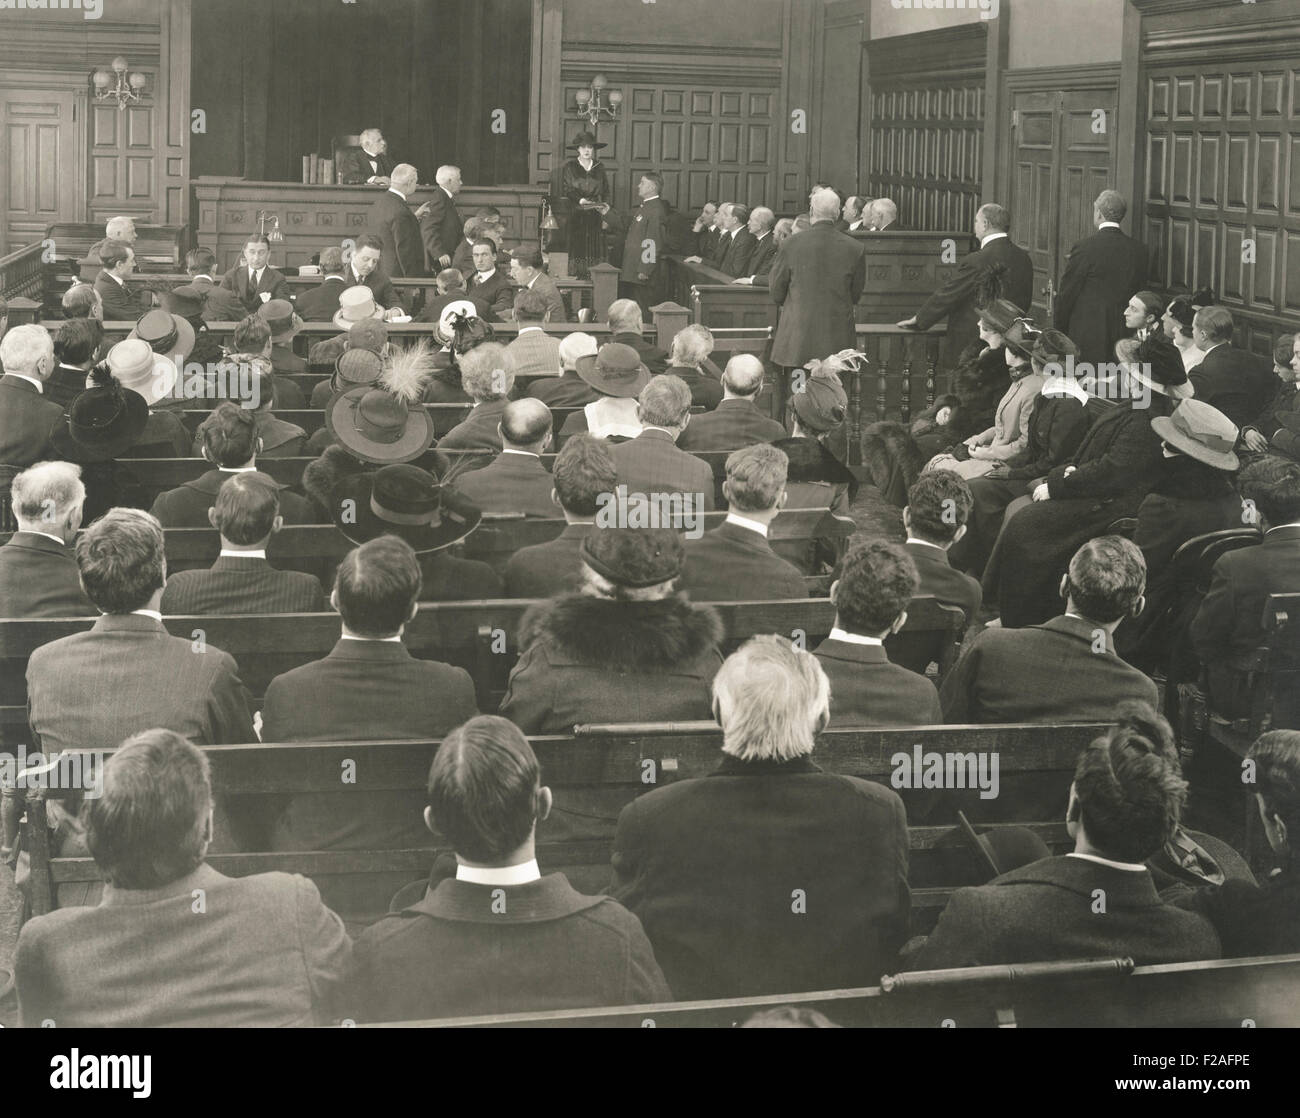 People sitting on benches in courtroom (OLVI008 OU347 F) Stock Photo